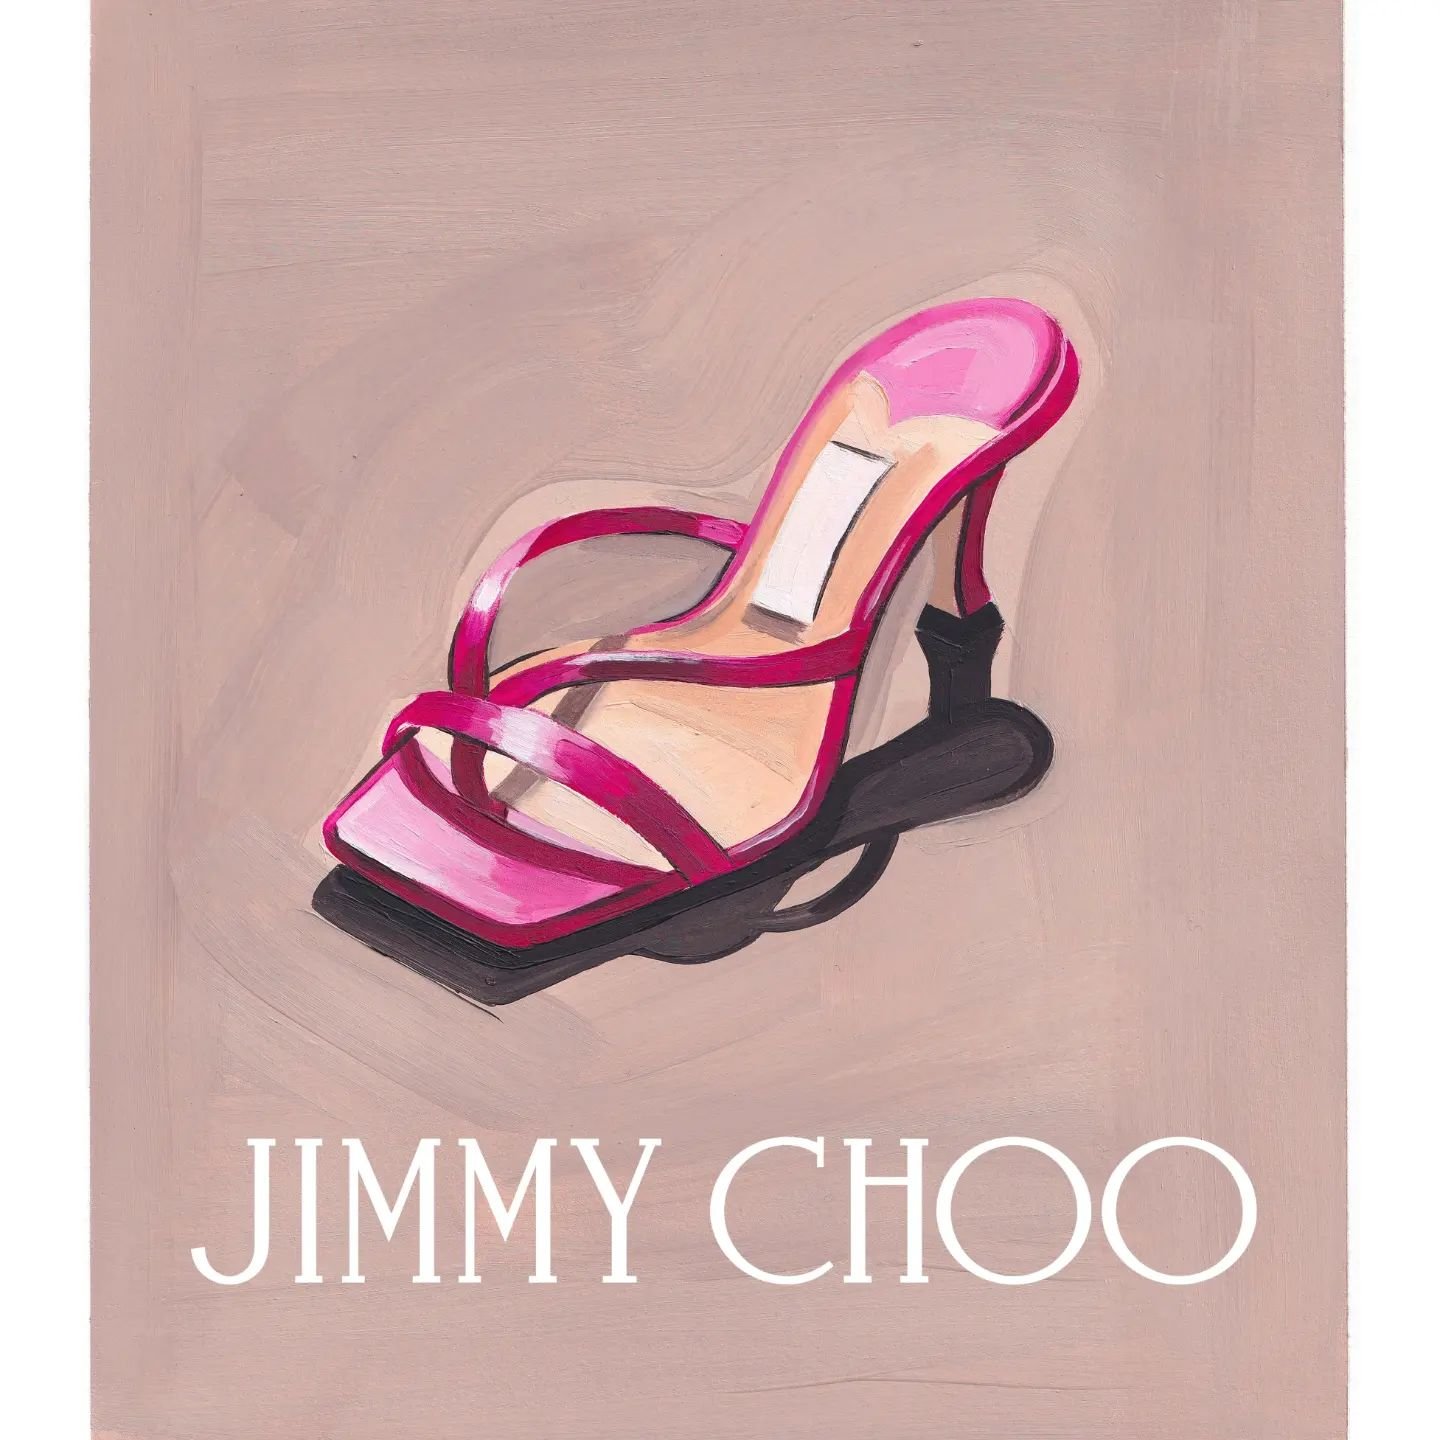 Oil painting on paper inspired by @jimmychoo 🎨
.
.
.
.
.
.
#fashionillustrator #fashiondrawing #fashionart #shoedrawing #illustratrice #dessinatrice #peintre